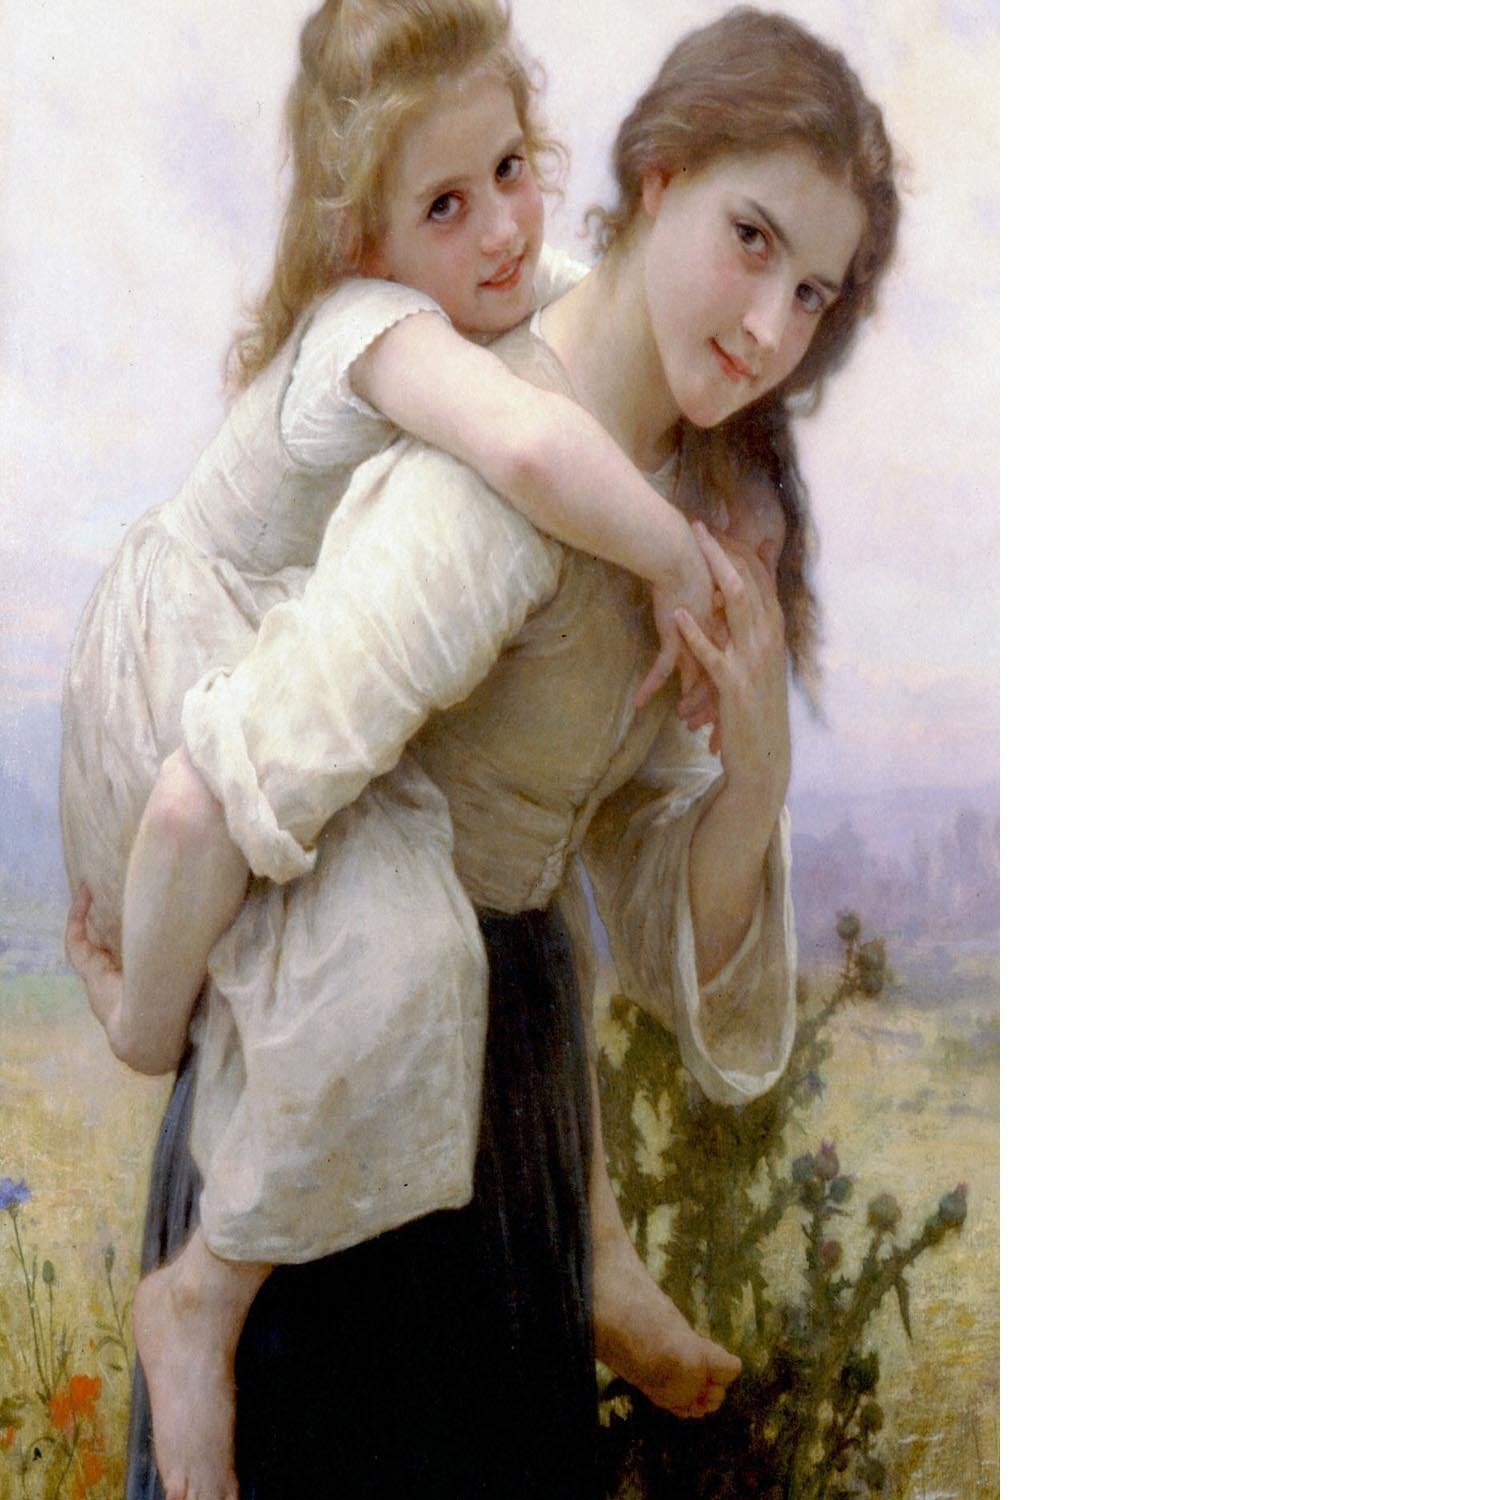 Not Too Much To Carry By Bouguereau Floating Framed Canvas